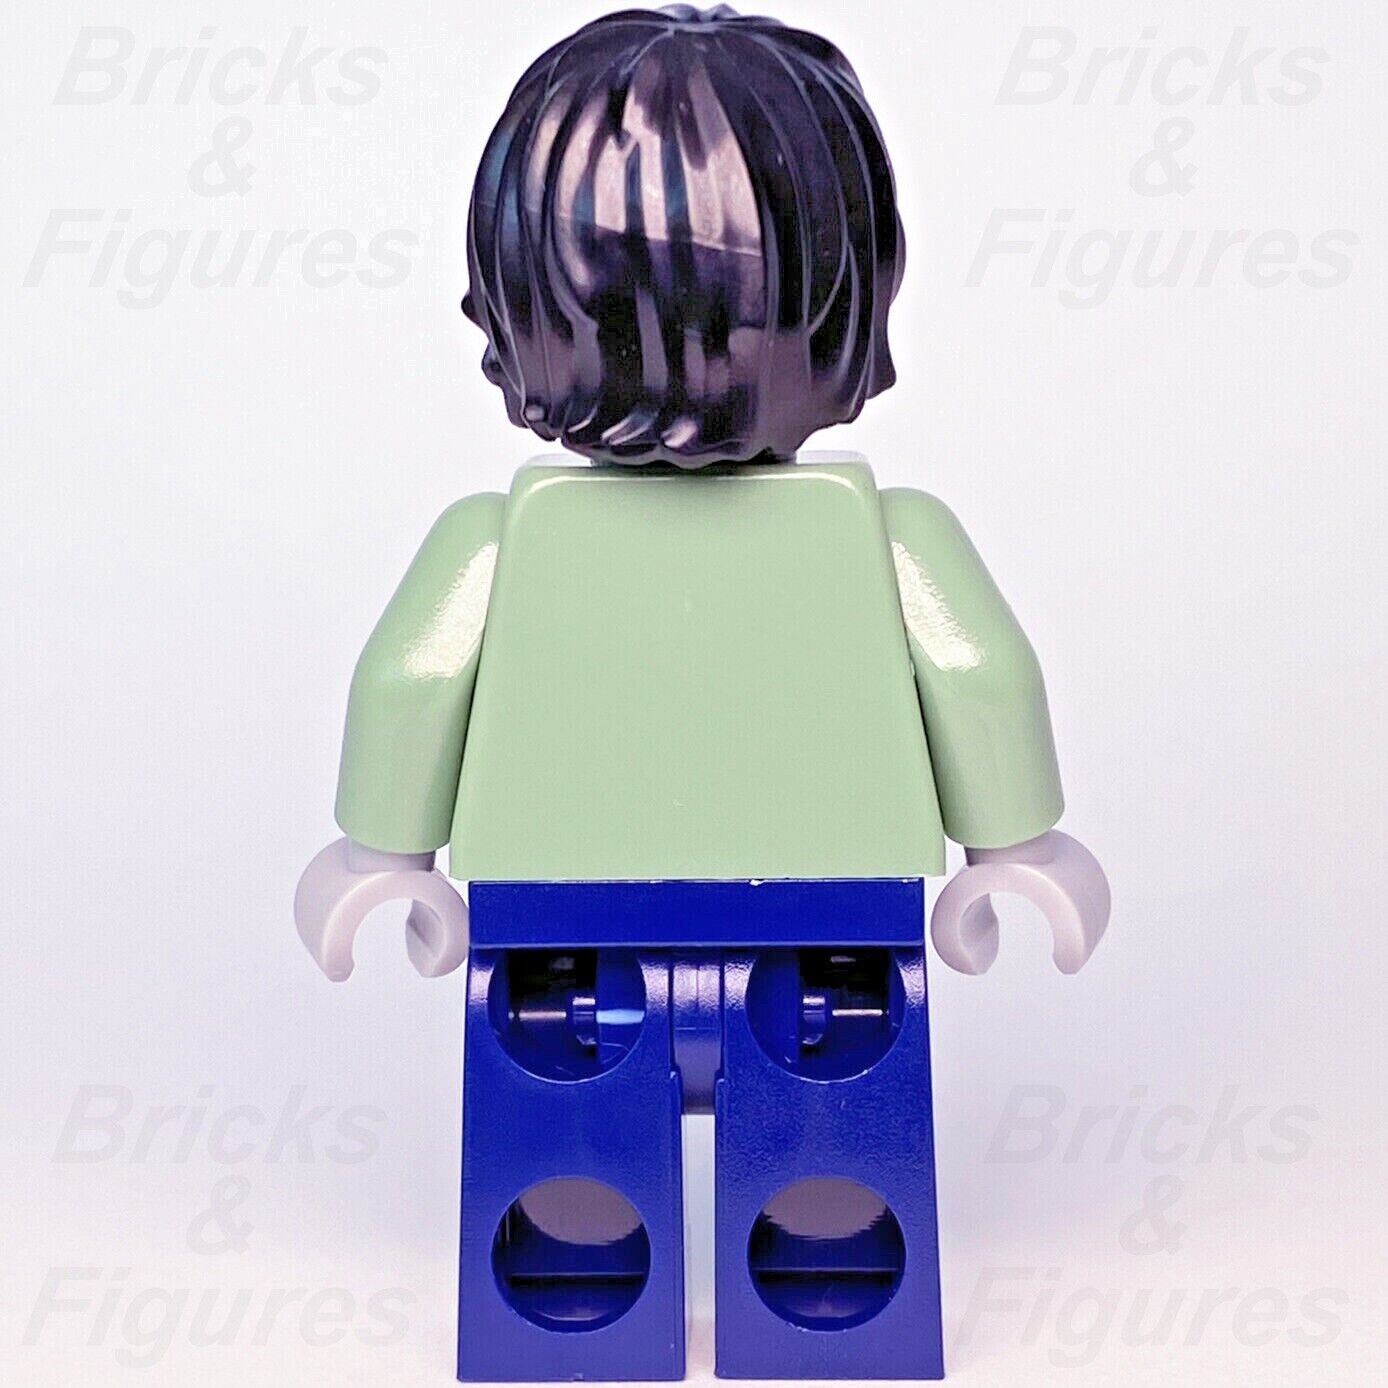 Collectible Minifigures LEGO Zombie Skateboarder Holiday & Event Minifig col227 - Bricks & Figures